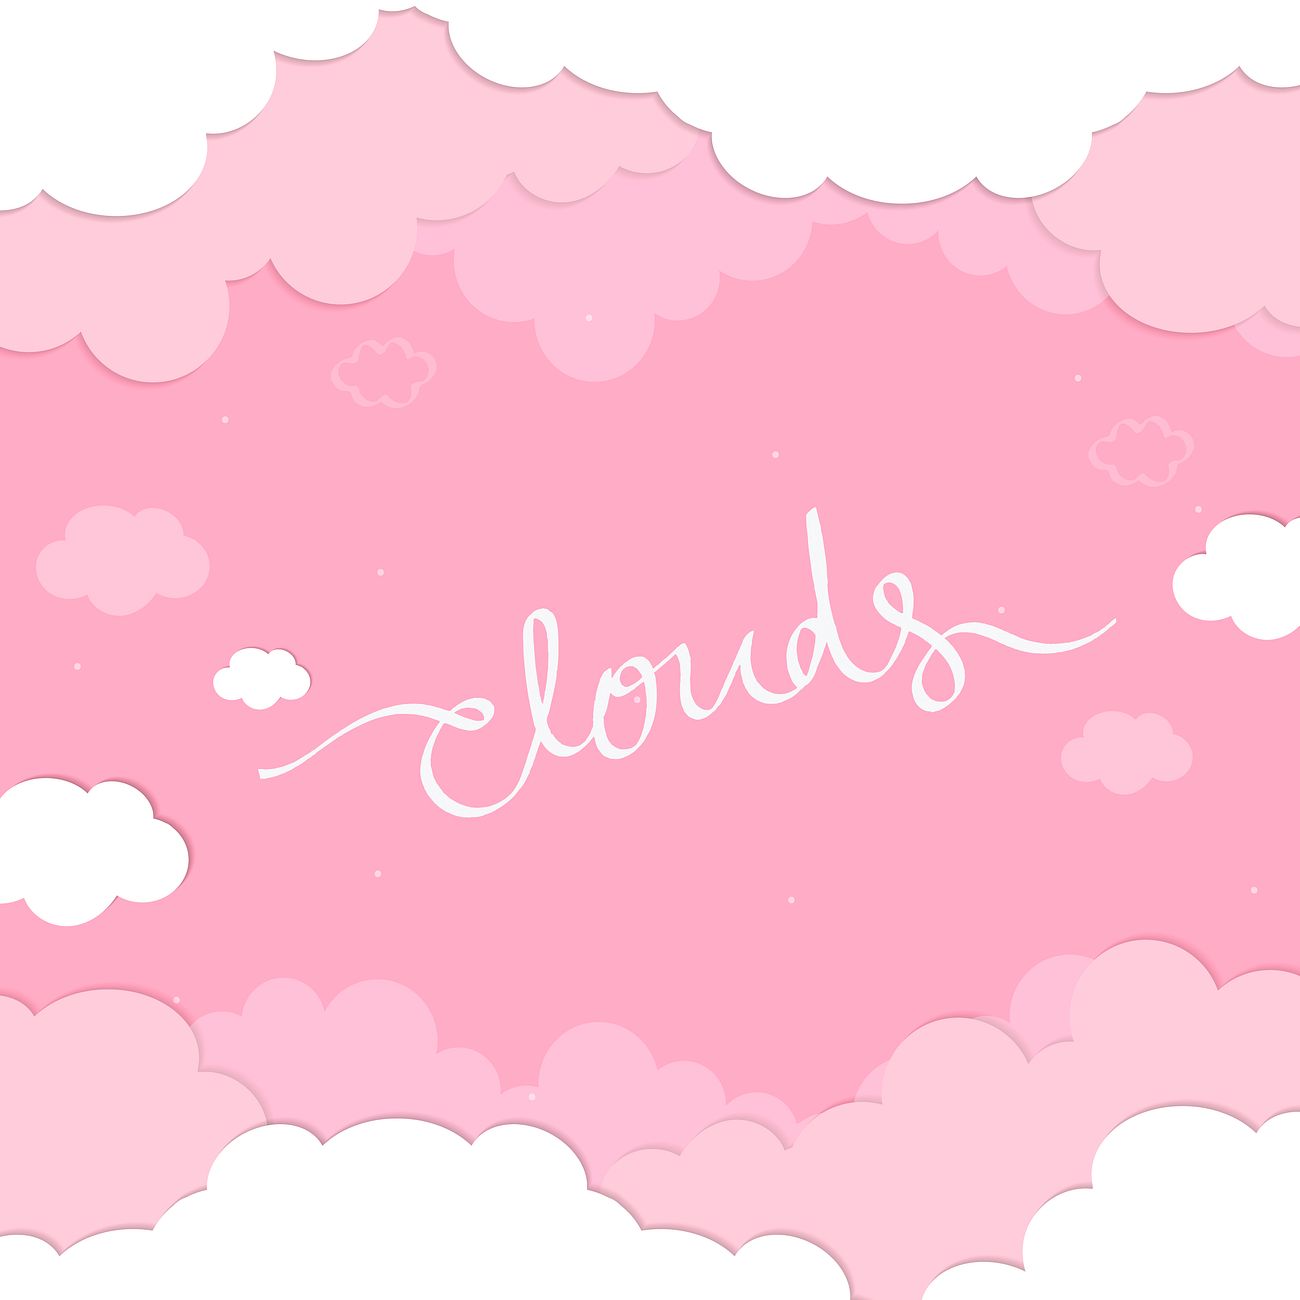 Cloudy Pink Sky Background Free Vector